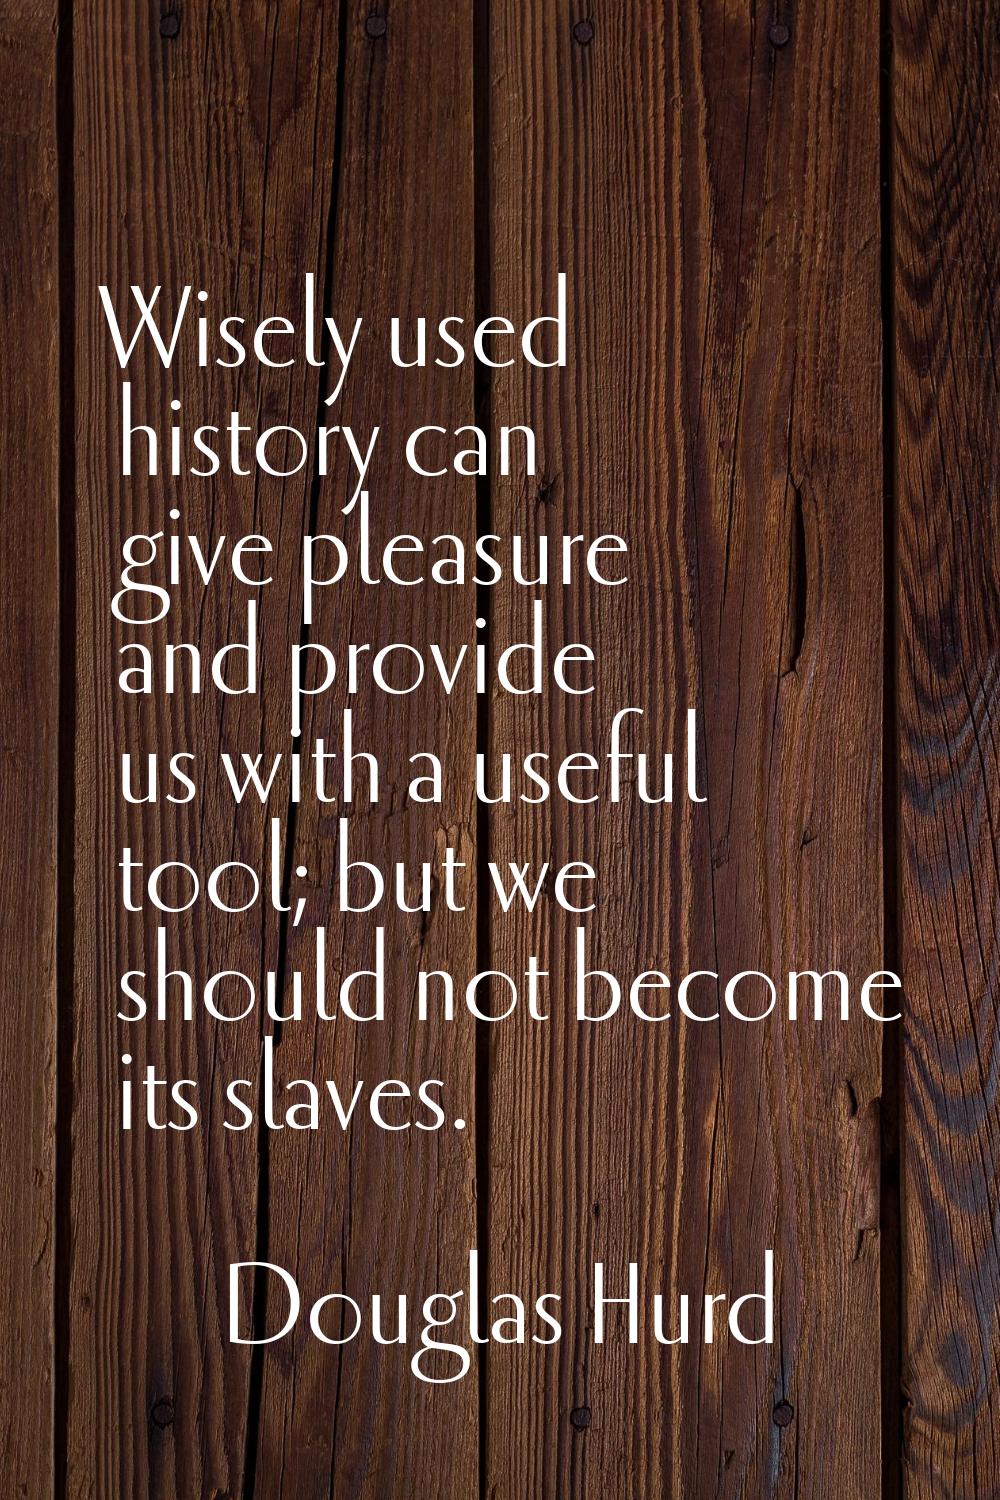 Wisely used history can give pleasure and provide us with a useful tool; but we should not become i